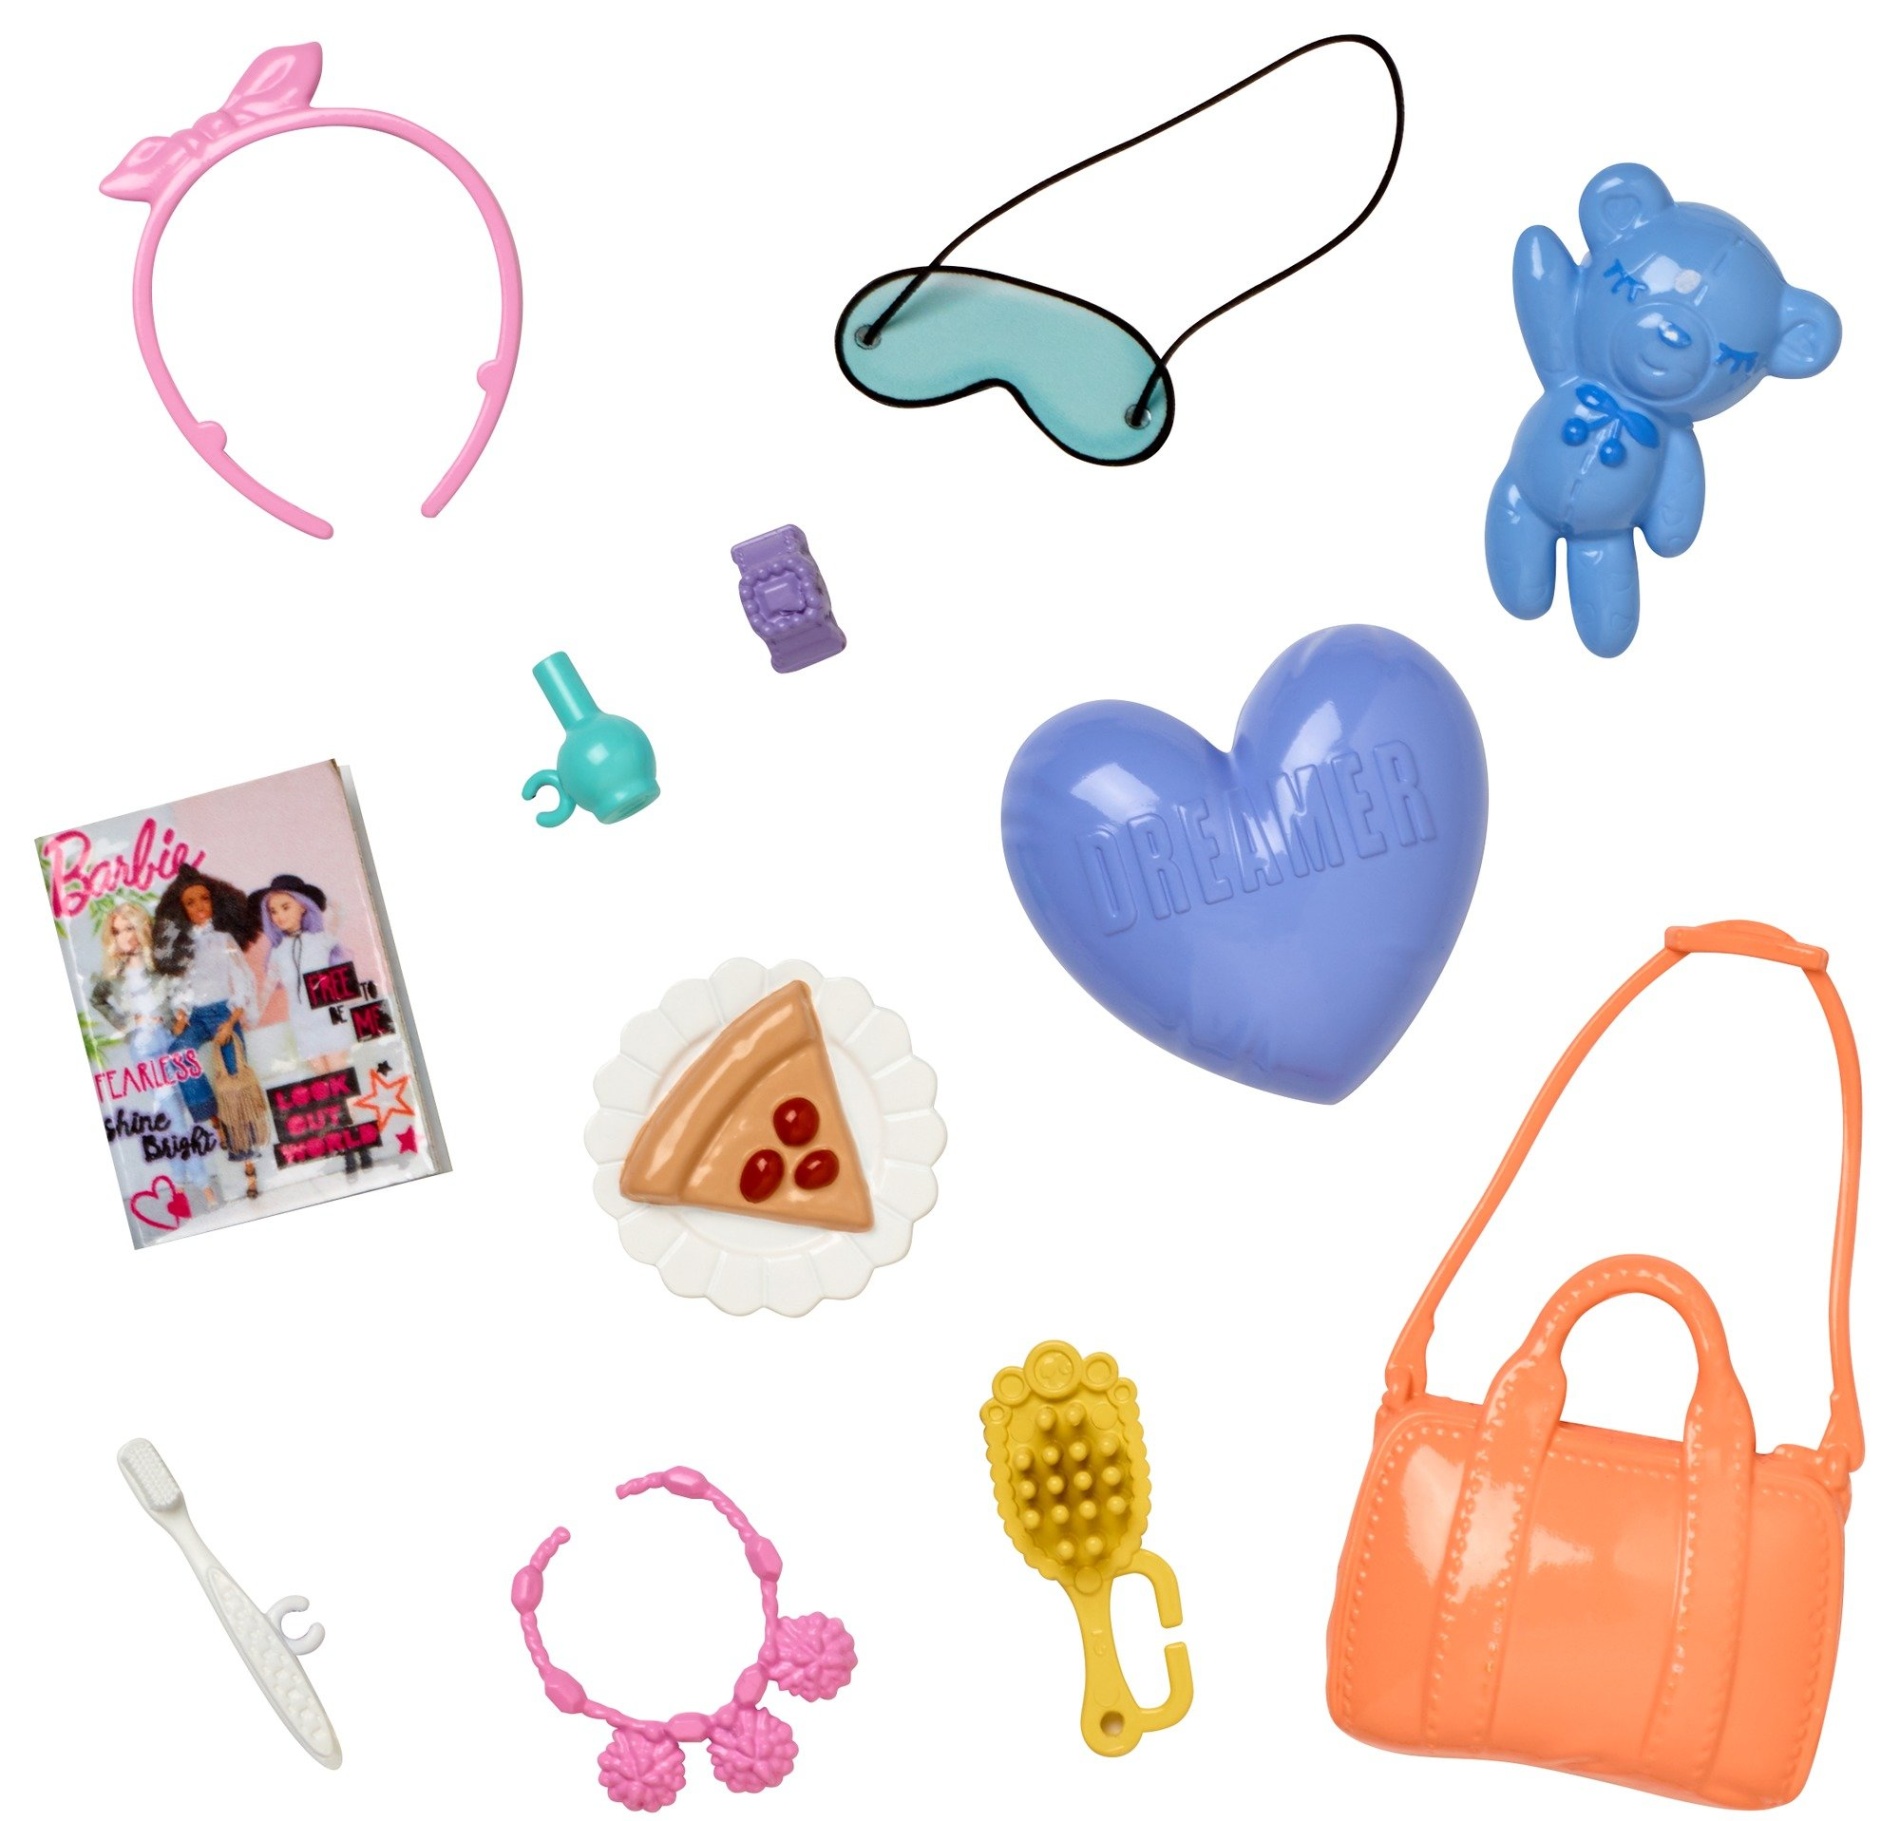 accessories for barbies Bulan 2 Amazon